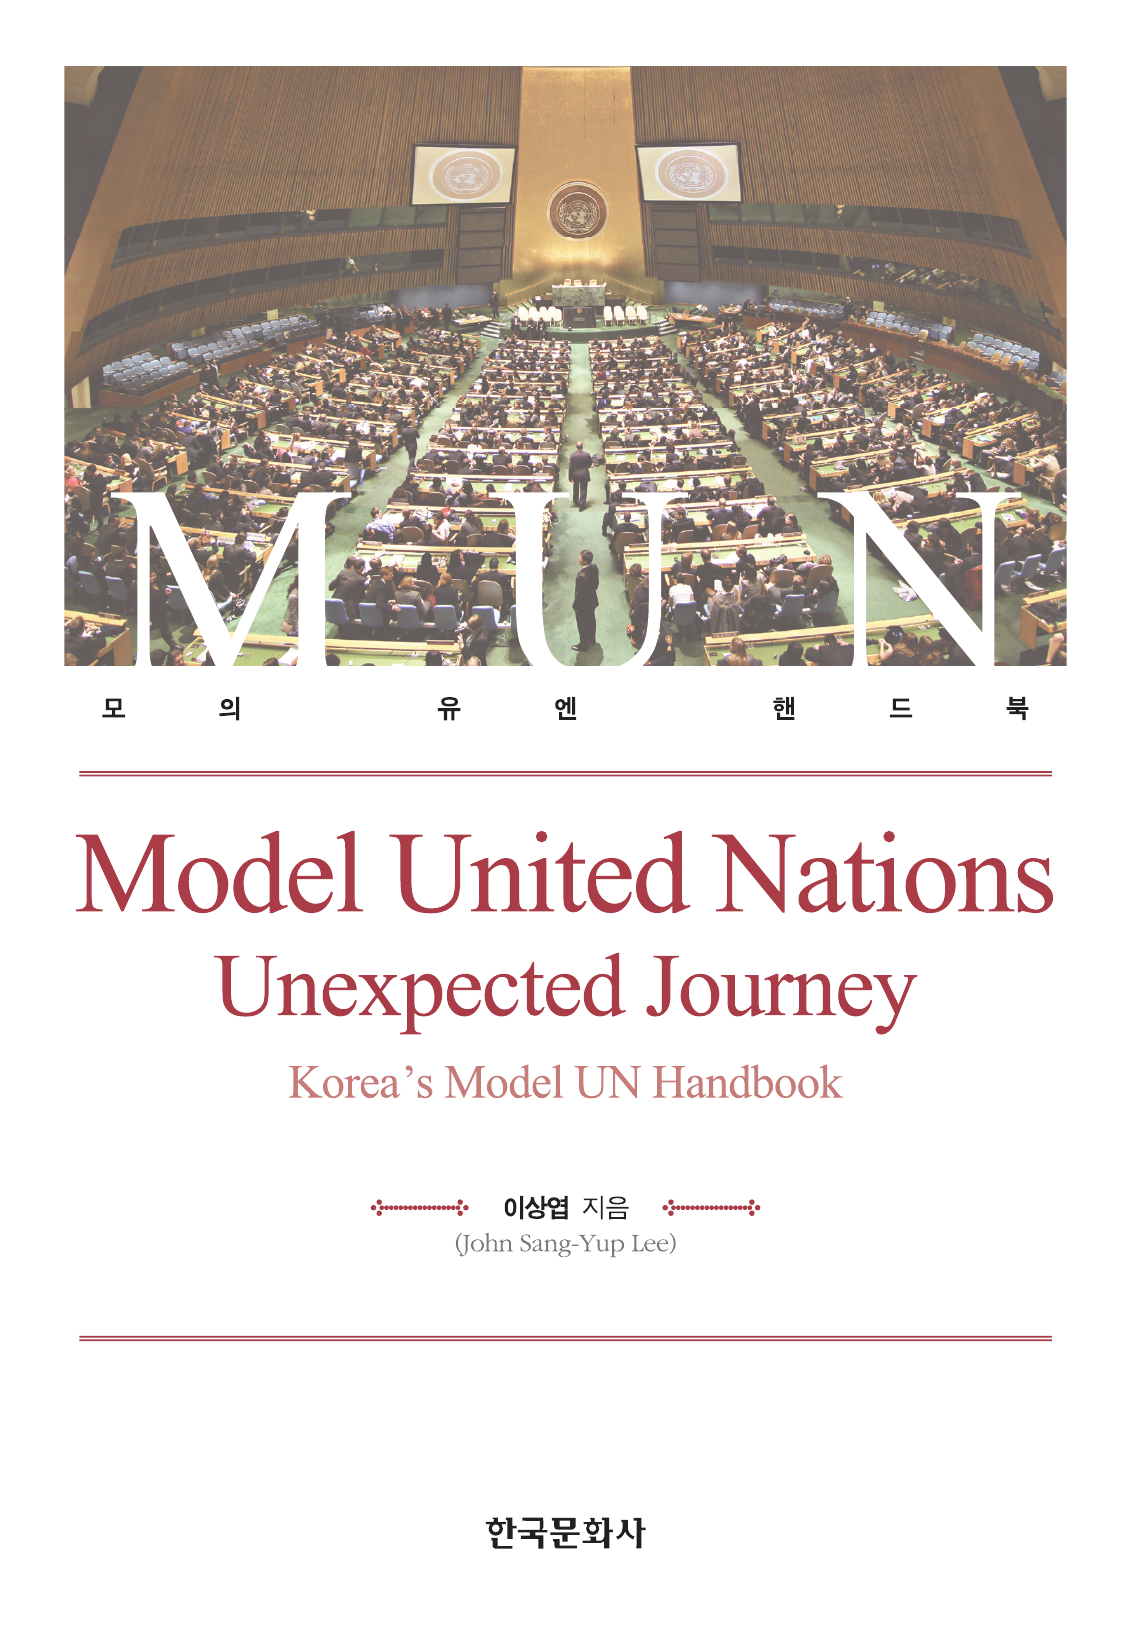 Model United Nations: Unexpected Journey